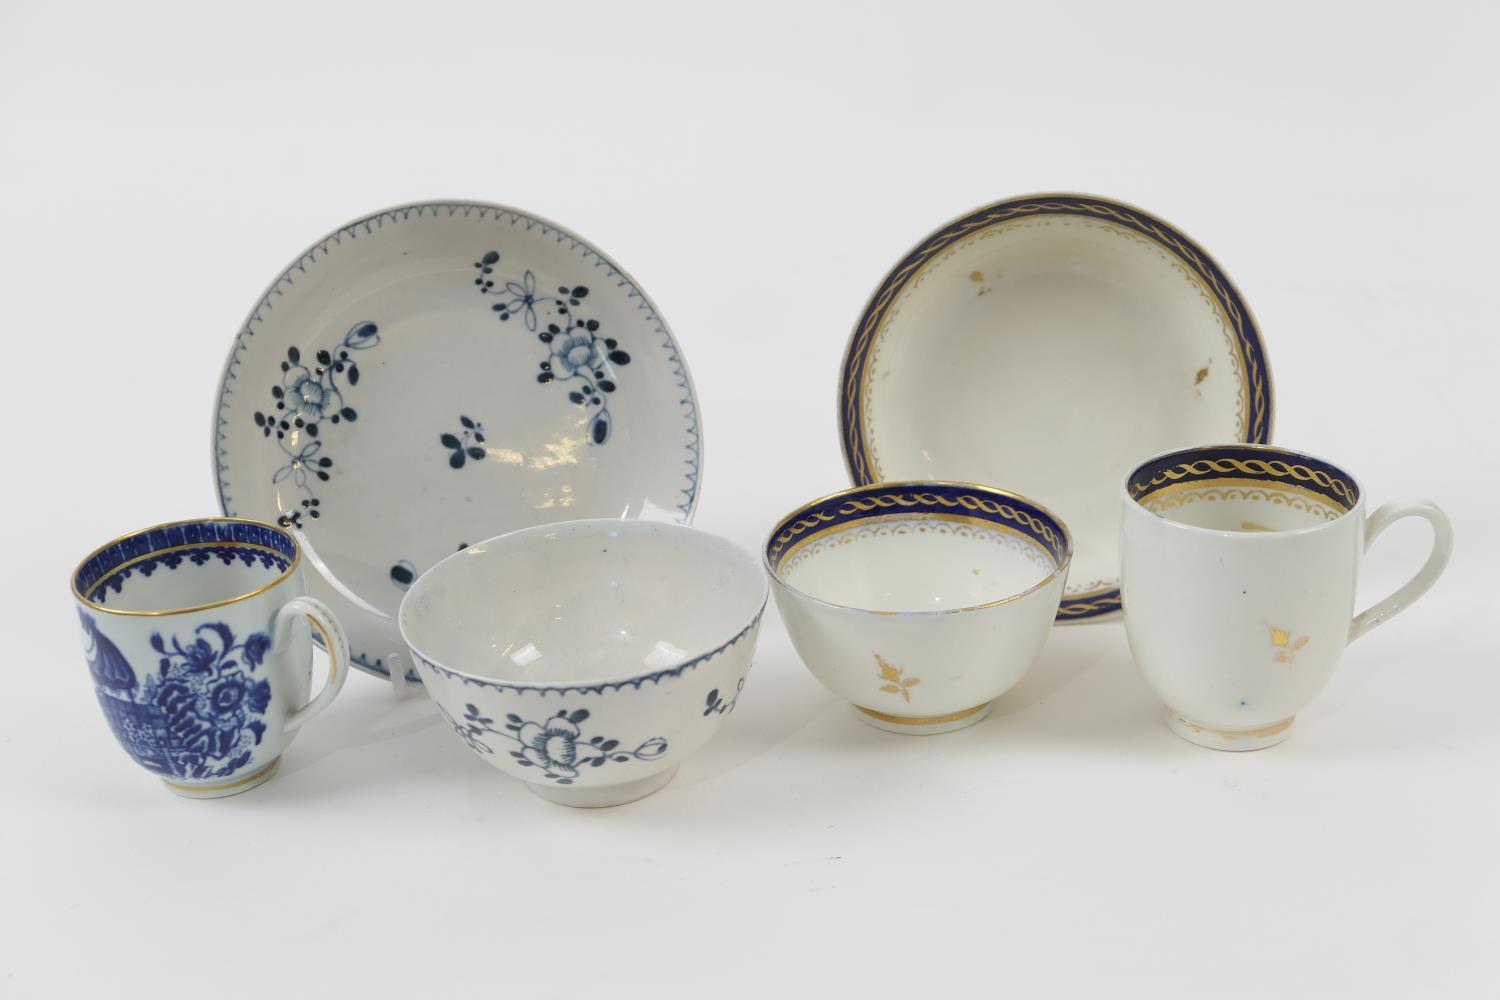 Philip Christian, Liverpool, blue and white tea bowl and saucer, circa 1765-75, decorated in the